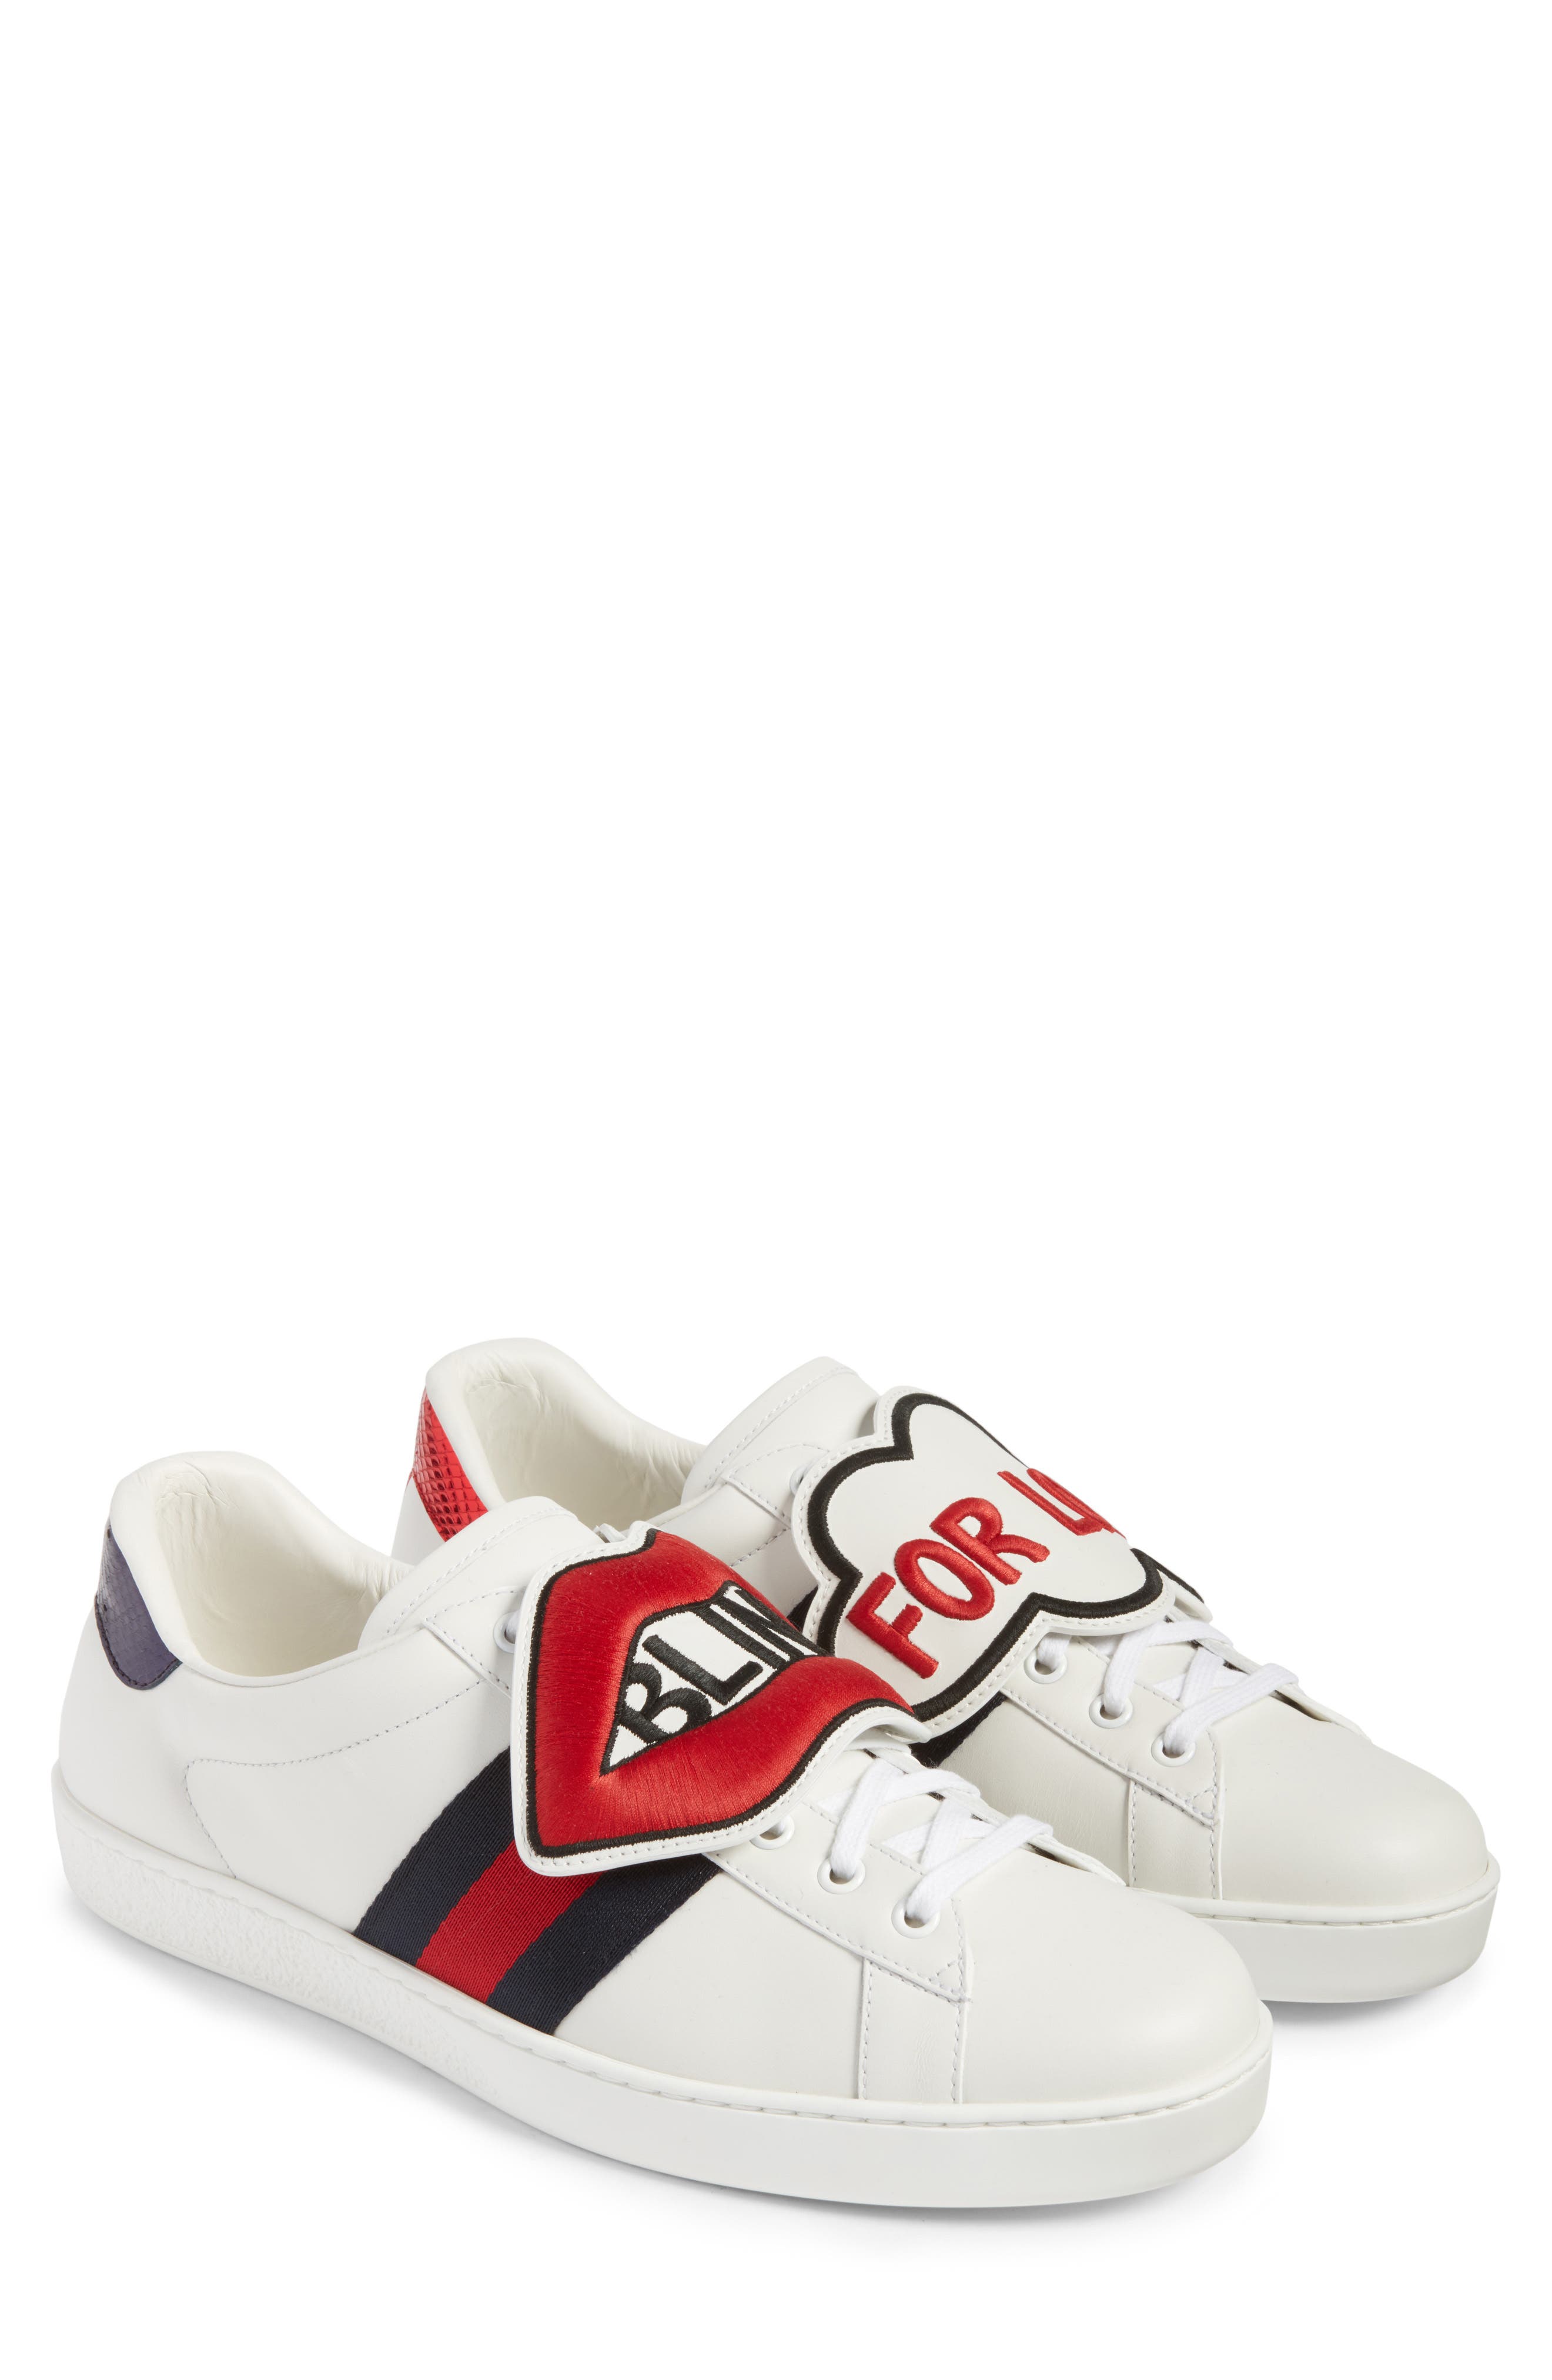 Gucci New Ace Embroidered Patch Sneaker 